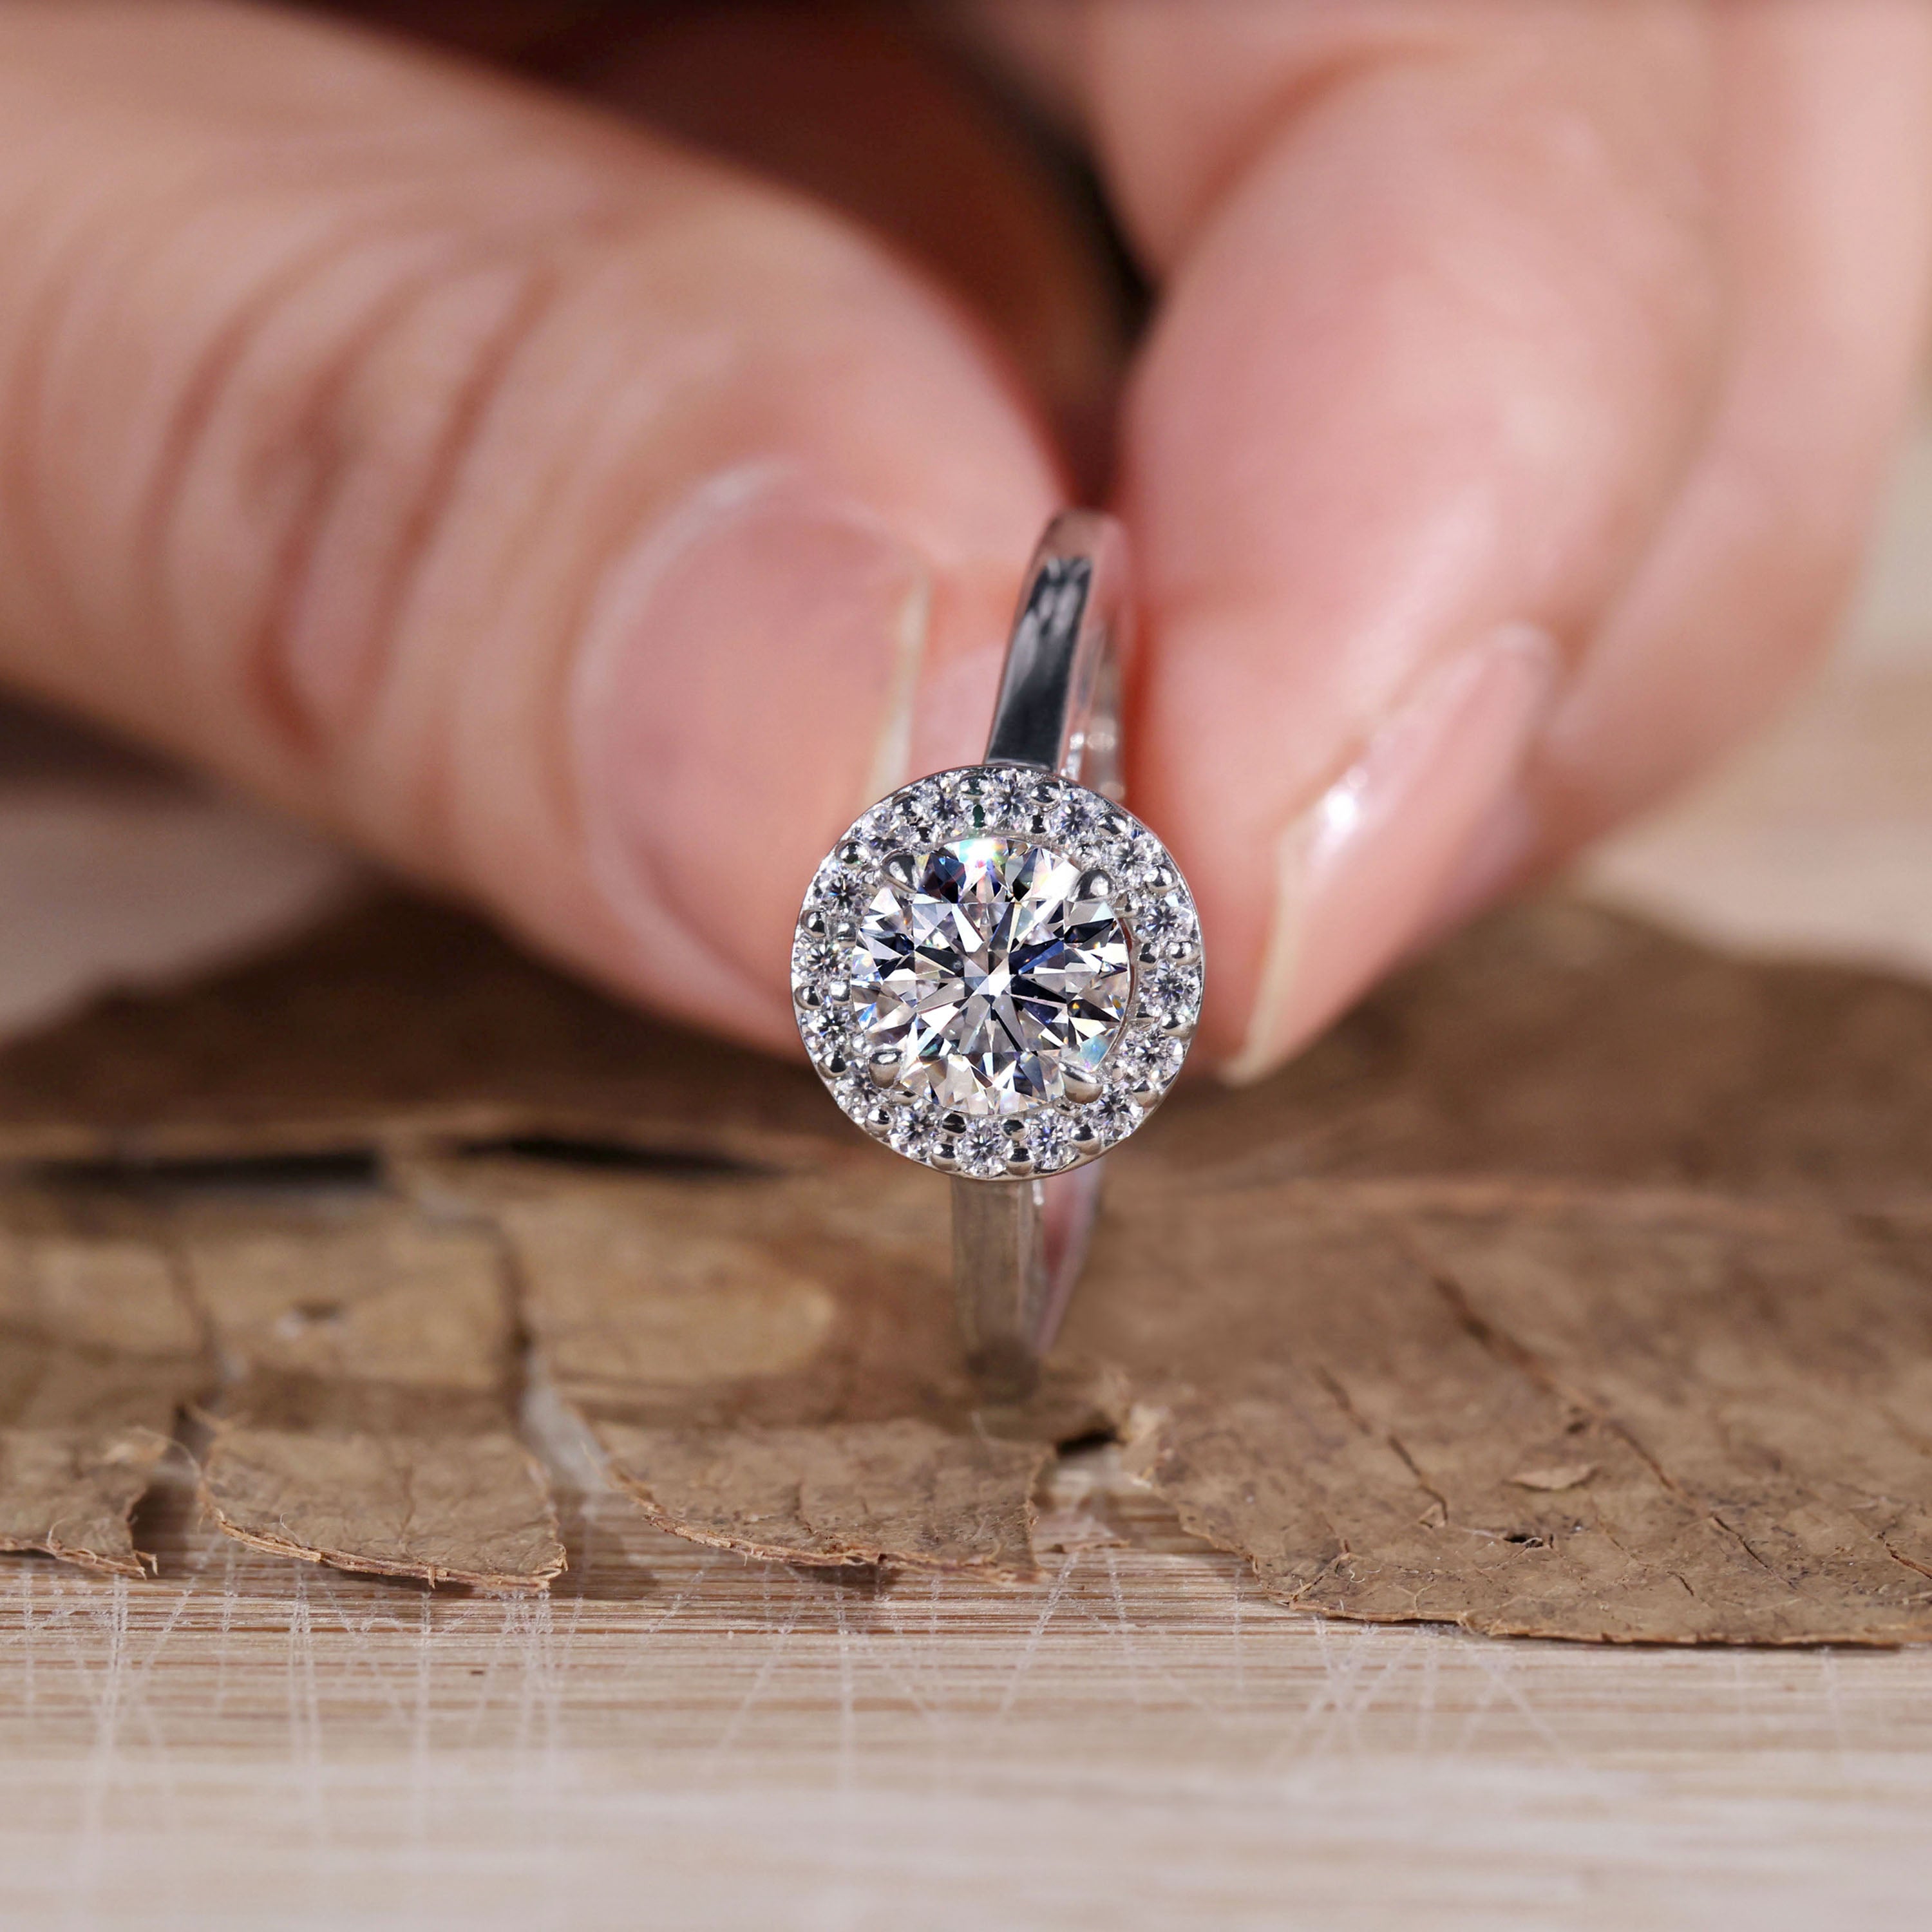 Take A Look on Our Moissnite and Lab Diamond Collection